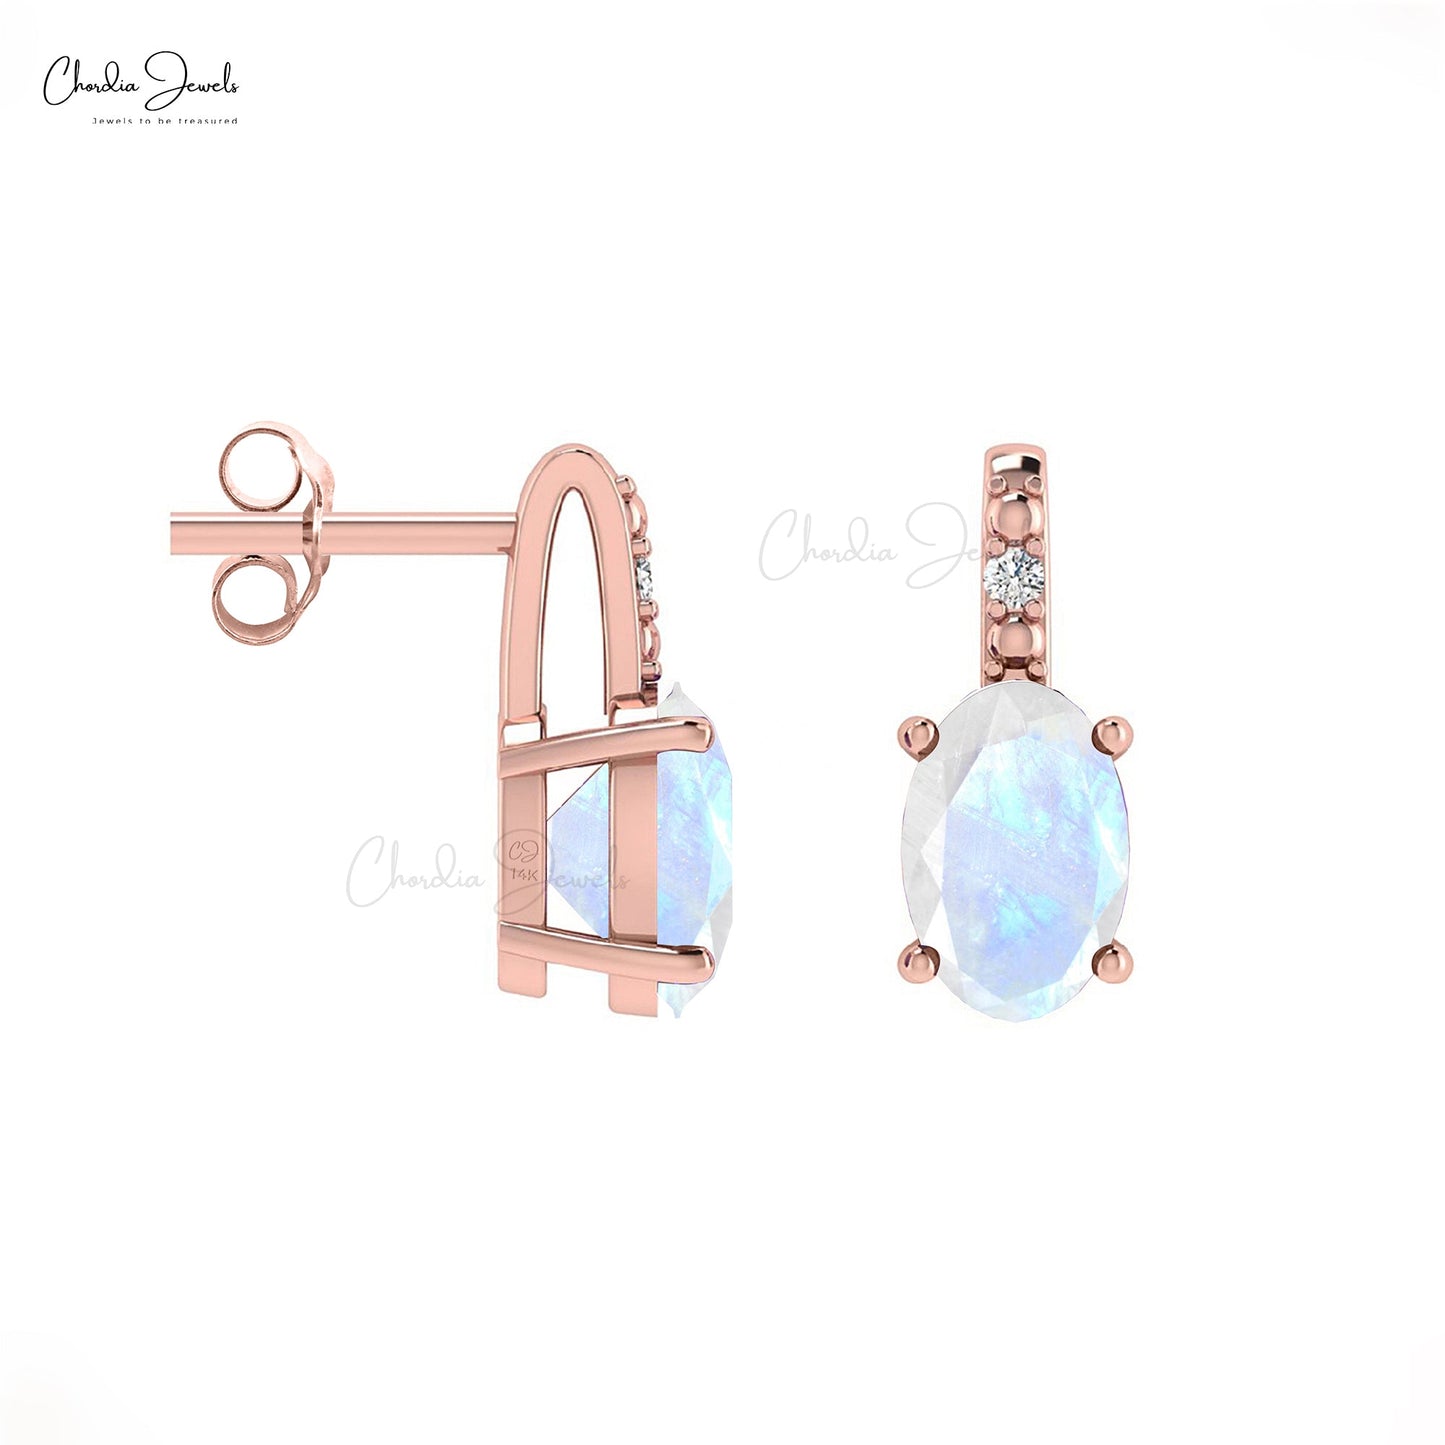 Load image into Gallery viewer, Fine Jewelry Rainbow Moonstone 14K Gold Earrings With Round Diamond
